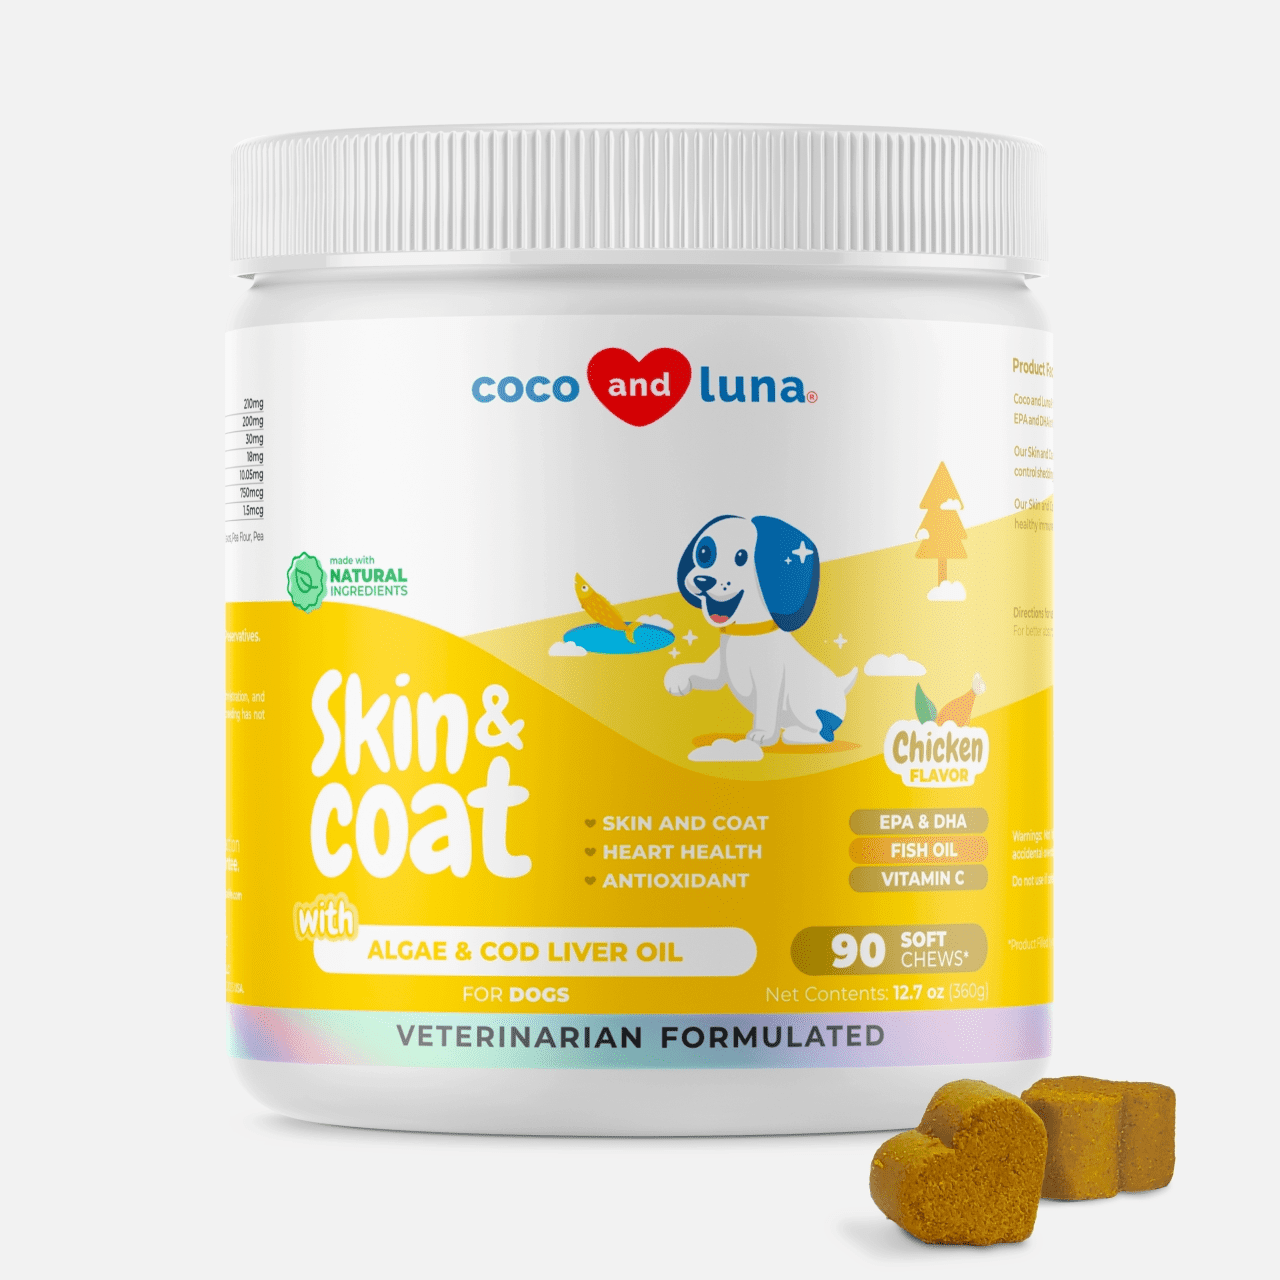 Skin & Coat for Dogs - 90 Soft Chews - Coco and Luna